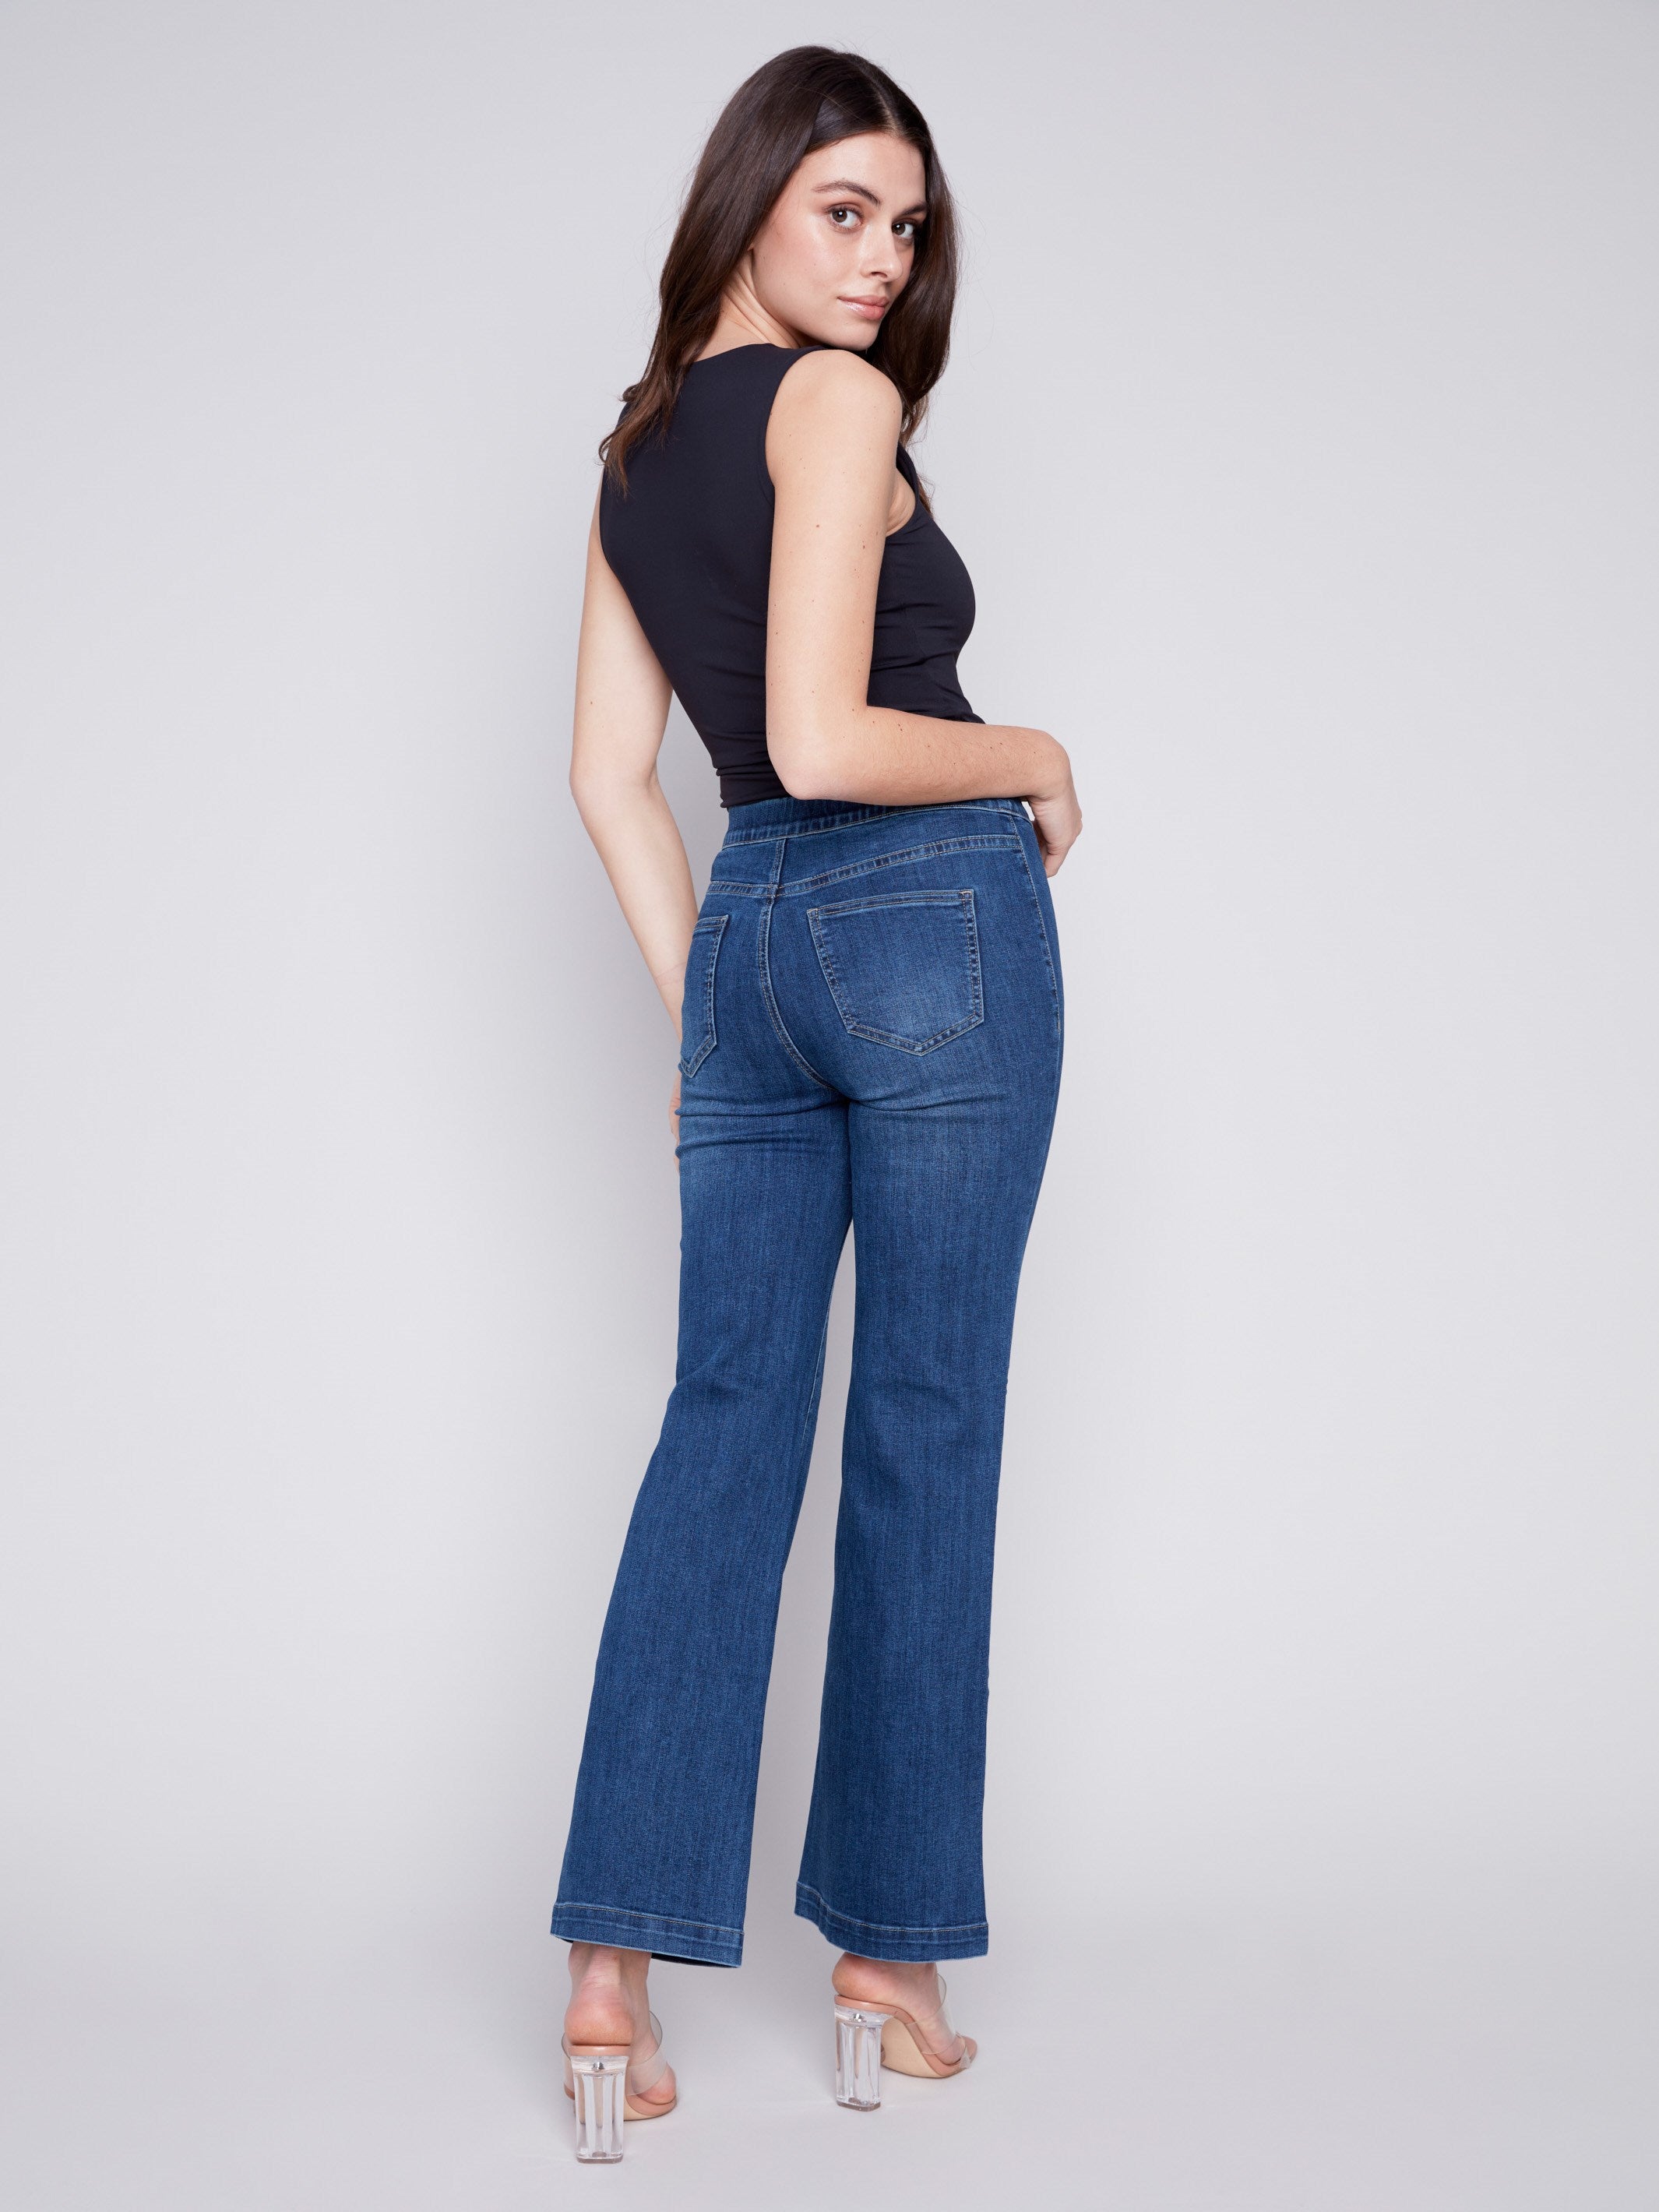 Charlie B Flare Jeans with Decorative Buttons - Indigo - Image 4